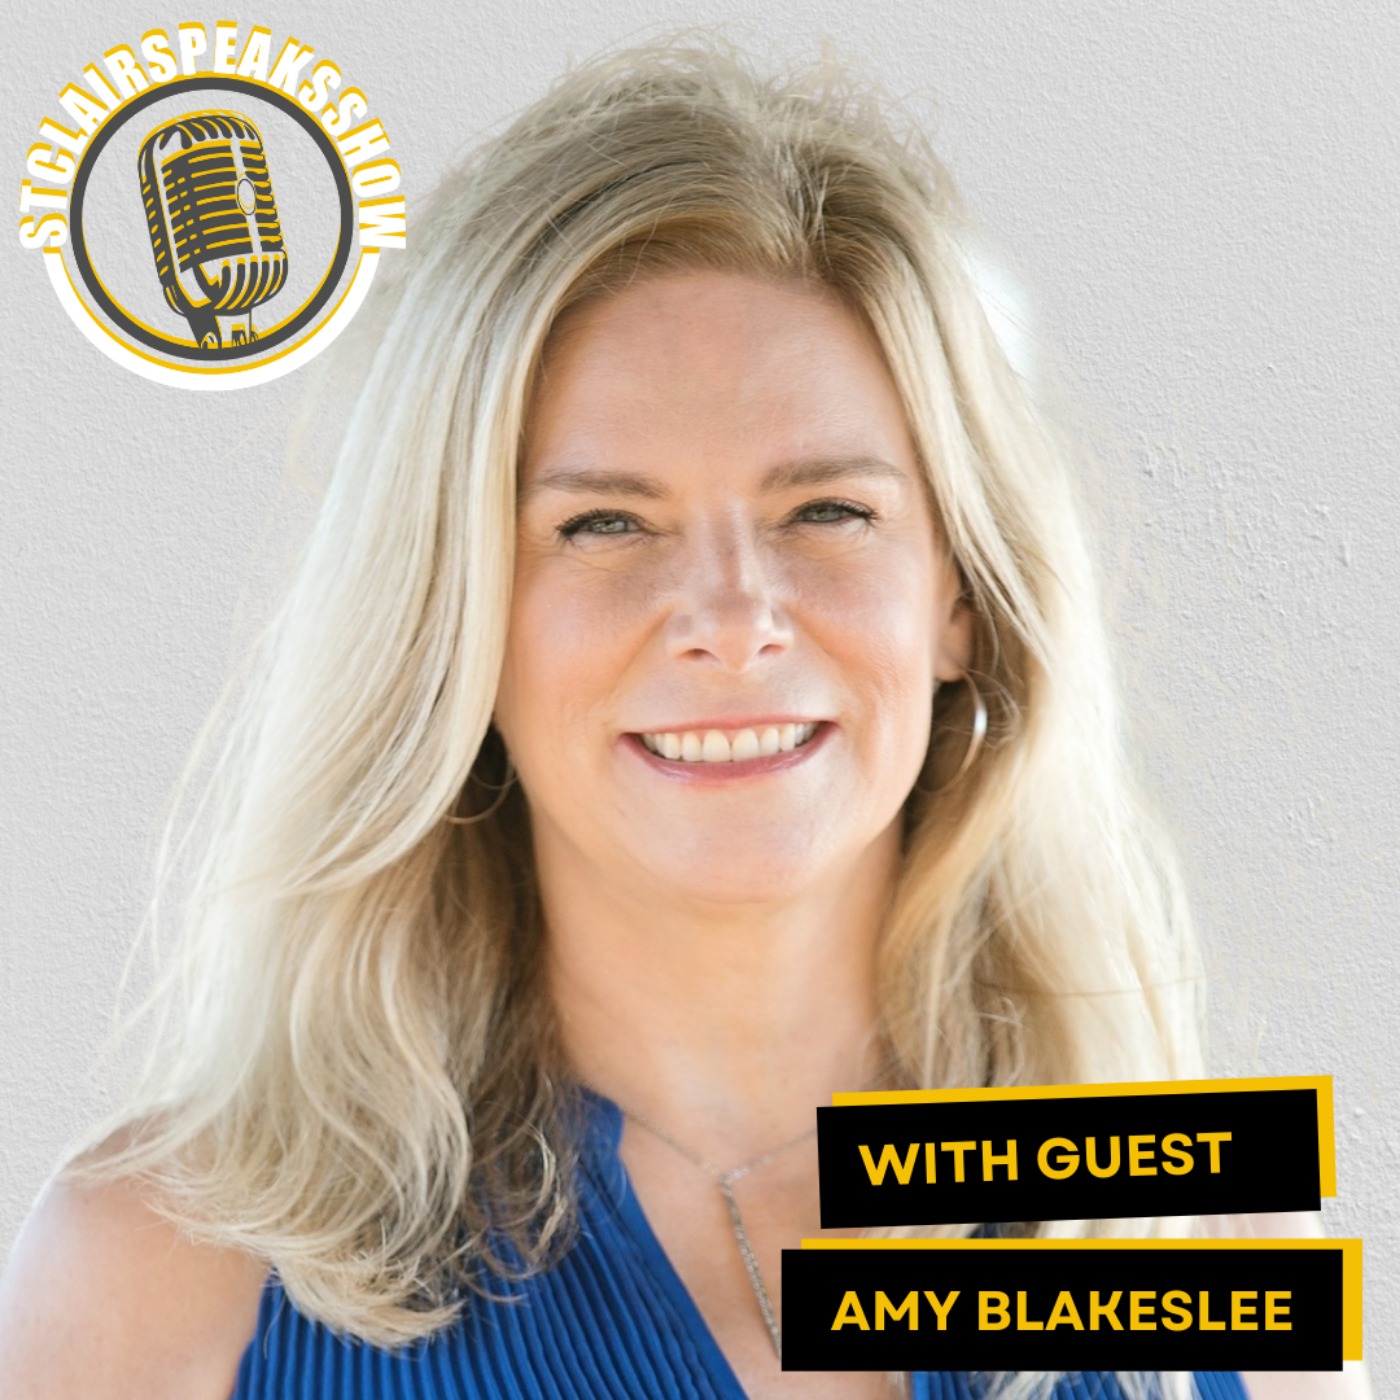 The StclairSpeaksShow Podcast with Amy Blakeslee - Awakening Through Anxiety And Overcoming Limiting Beliefs. Image